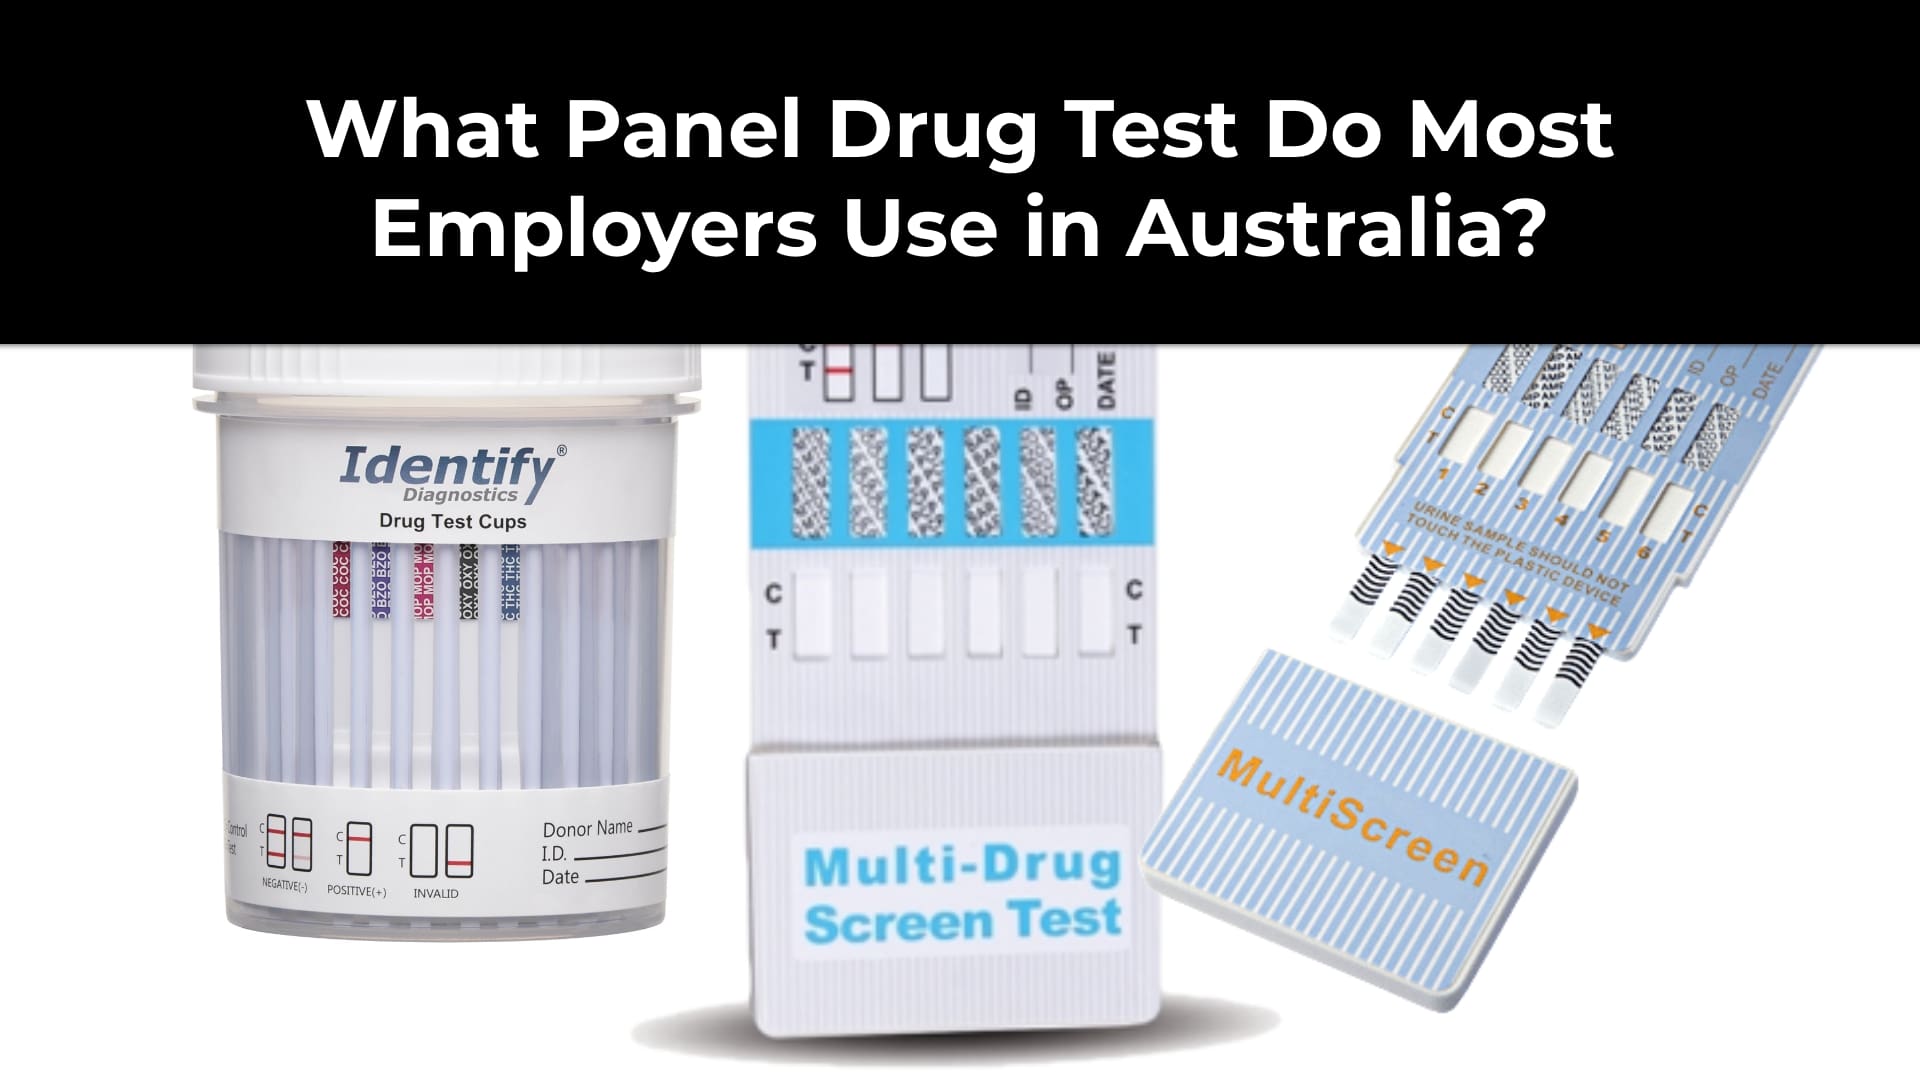 What Panel Drug Test Do Most Employers Use in Australia?